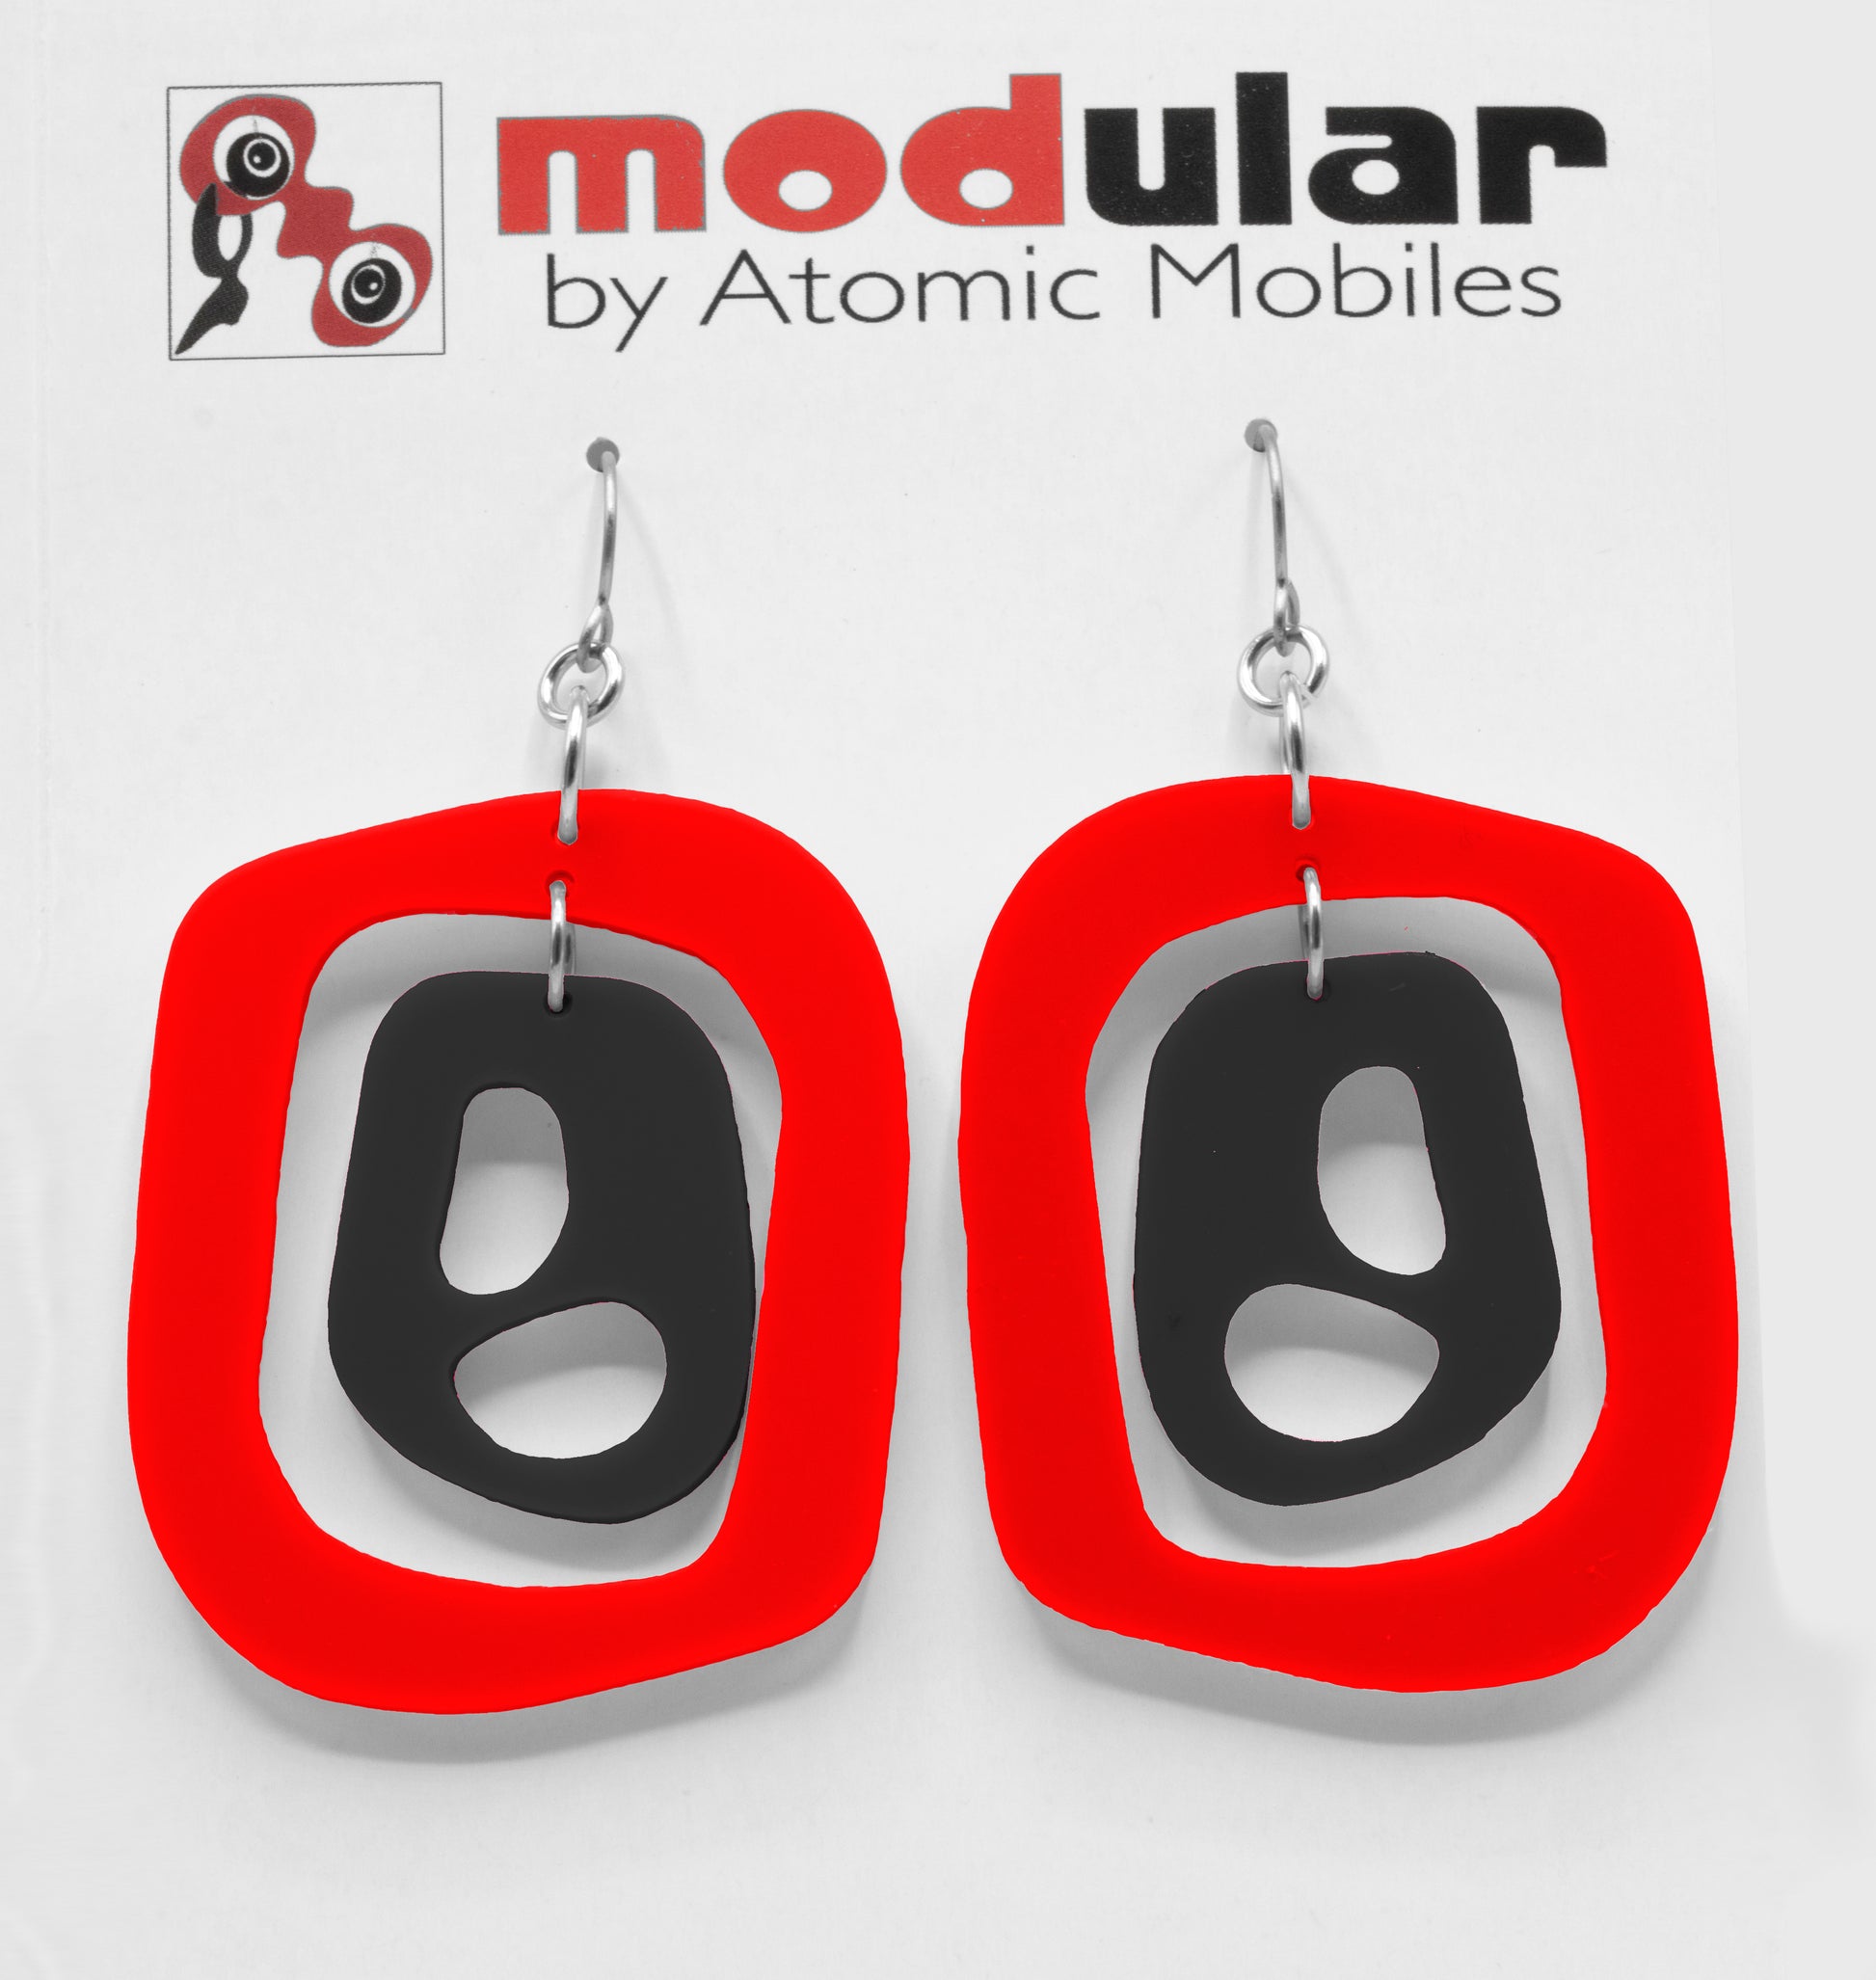 MODular Earrings - Mid 20th Statement Earrings in Red and Black by AtomicMobiles.com - retro era mod handmade jewelry